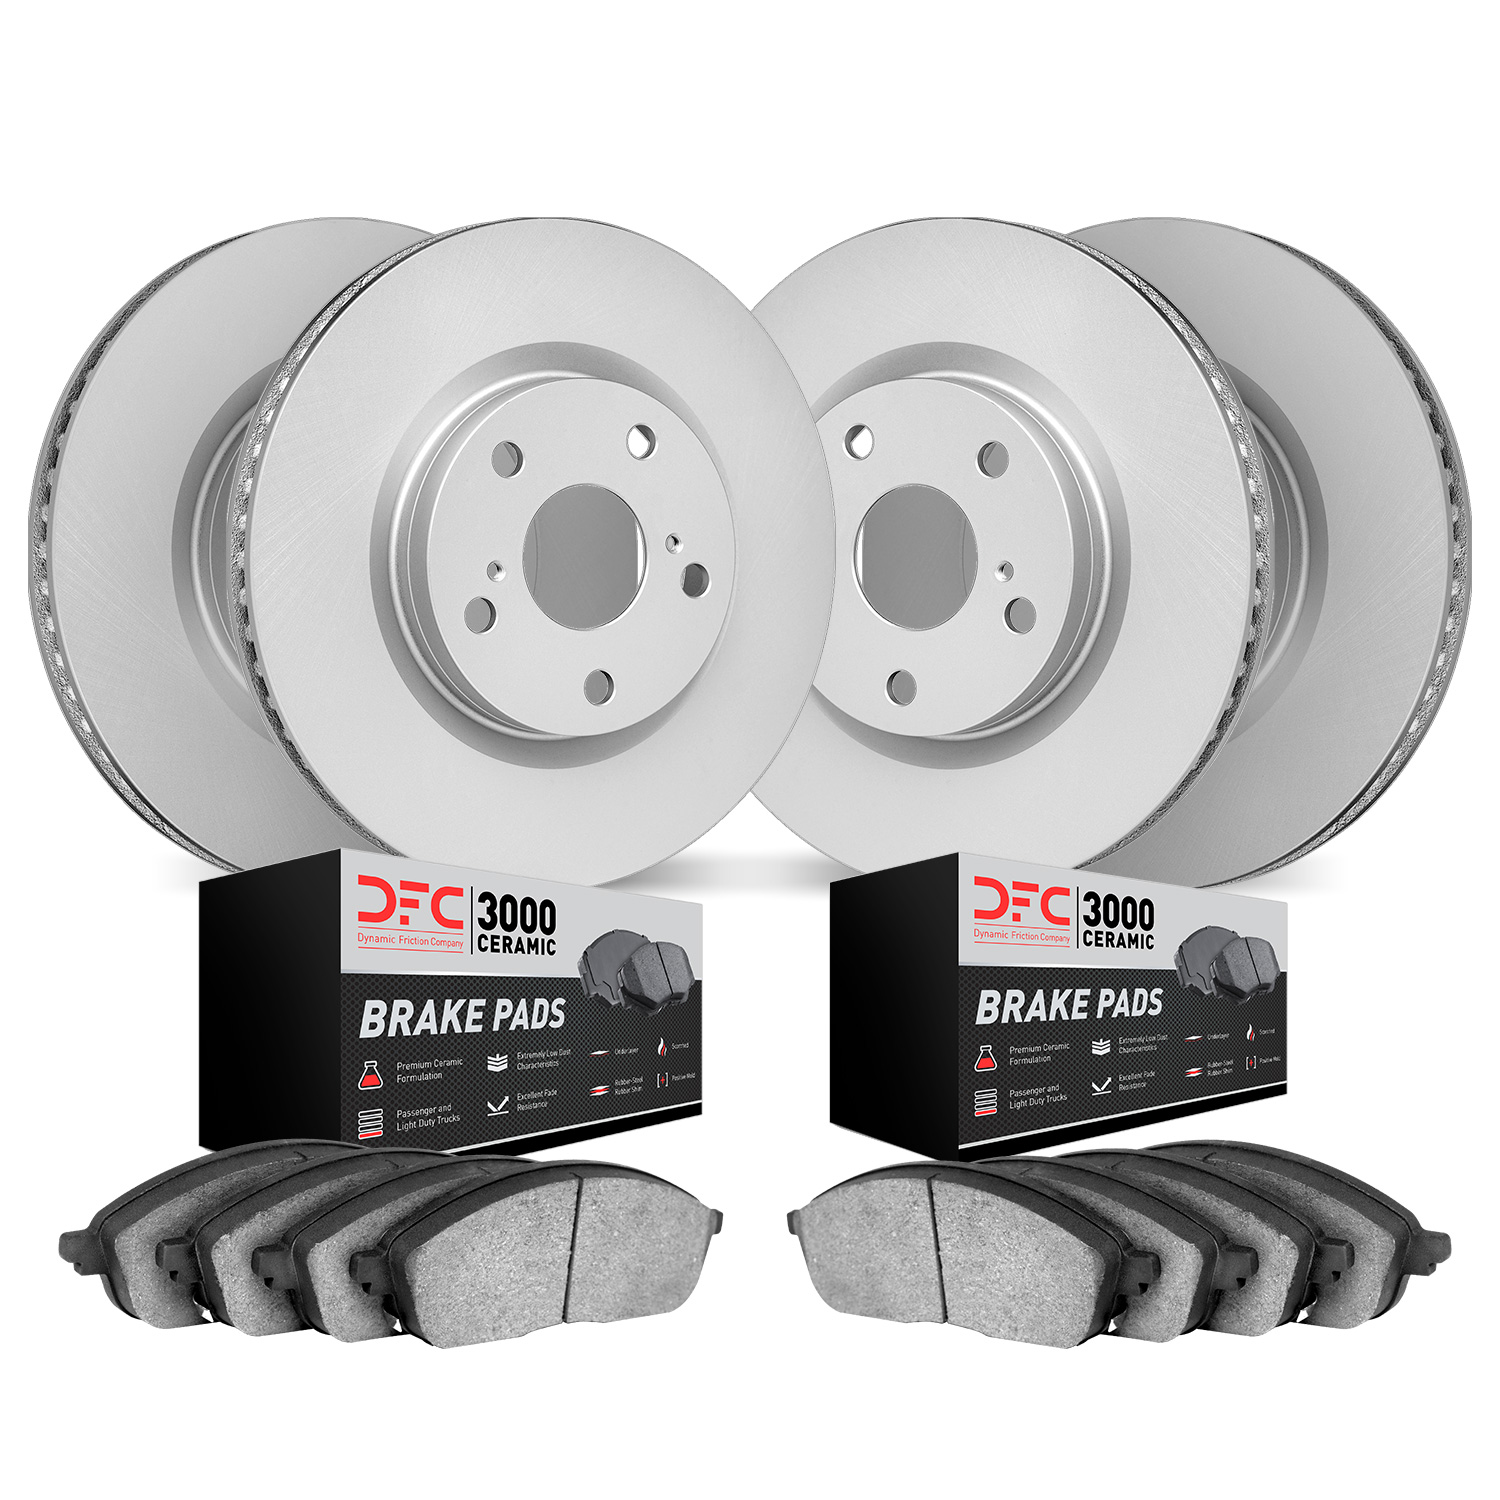 4304-73024 Geospec Brake Rotors with 3000-Series Ceramic Brake Pads Kit, 2004-2009 Audi/Volkswagen, Position: Front and Rear